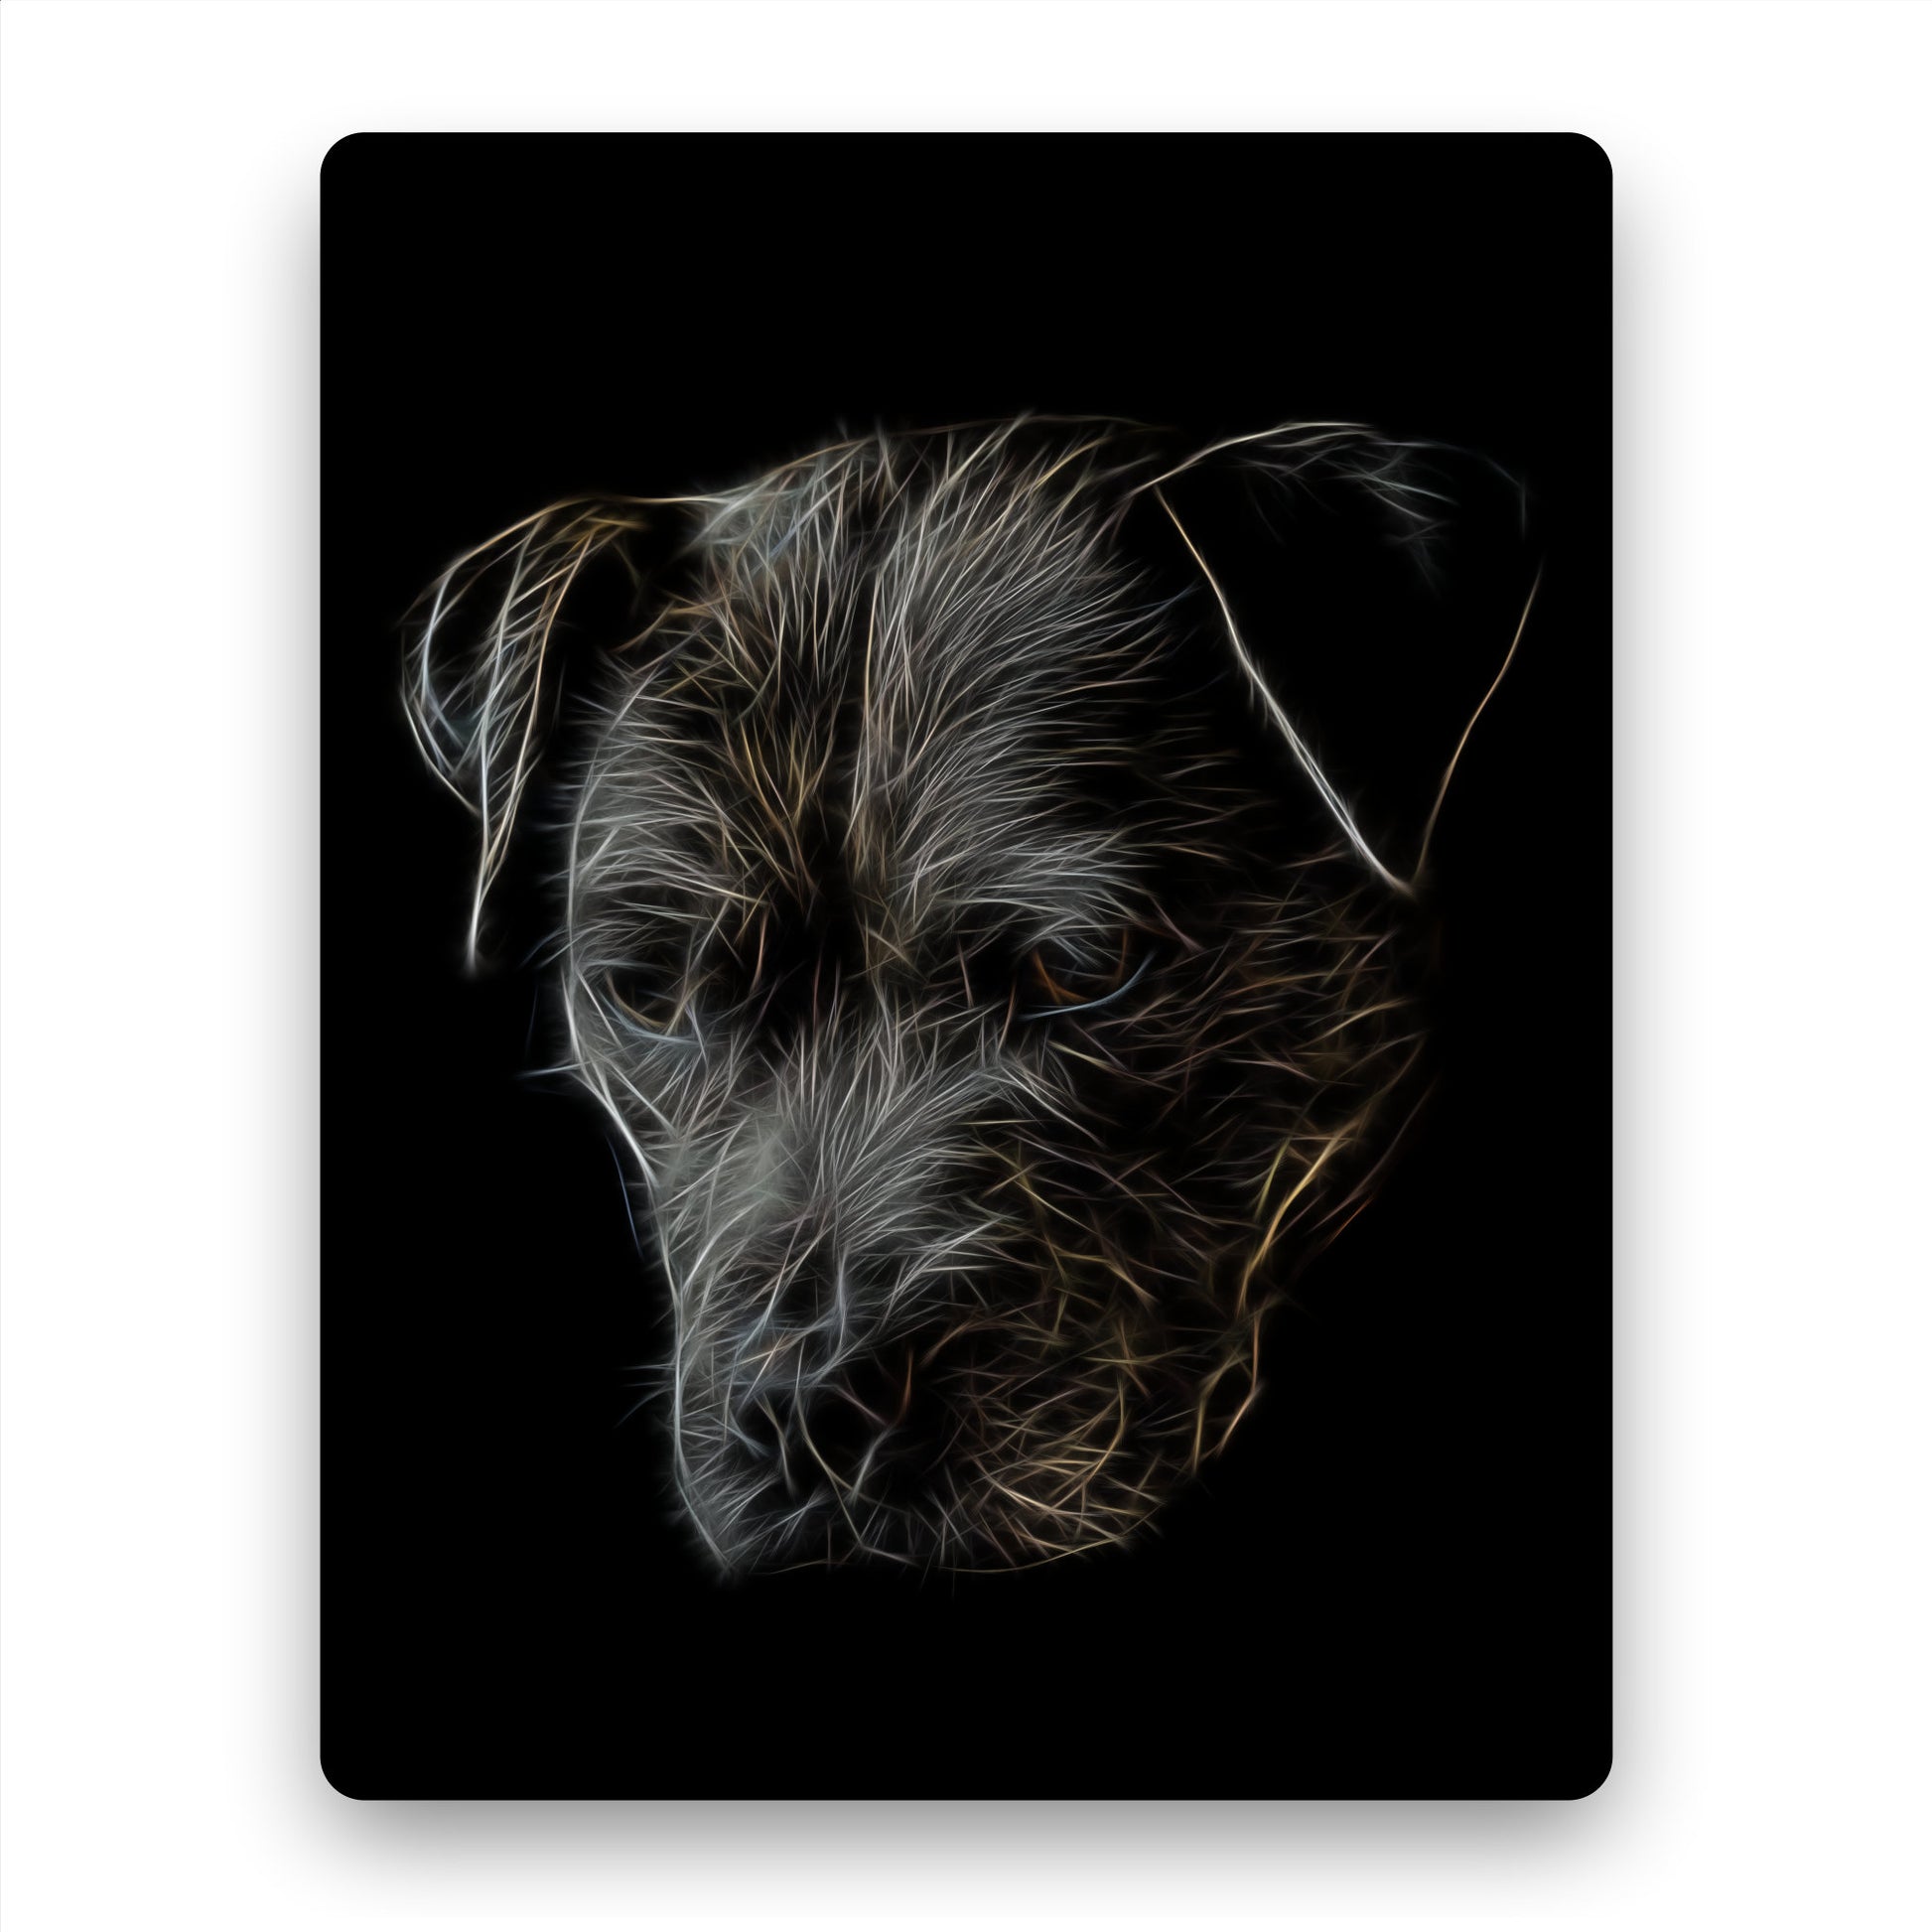 Black Staffordshire Bull Terrier Metal Wall Plaque with Fractal Art Design,  Perfect Dog Owner Gift.